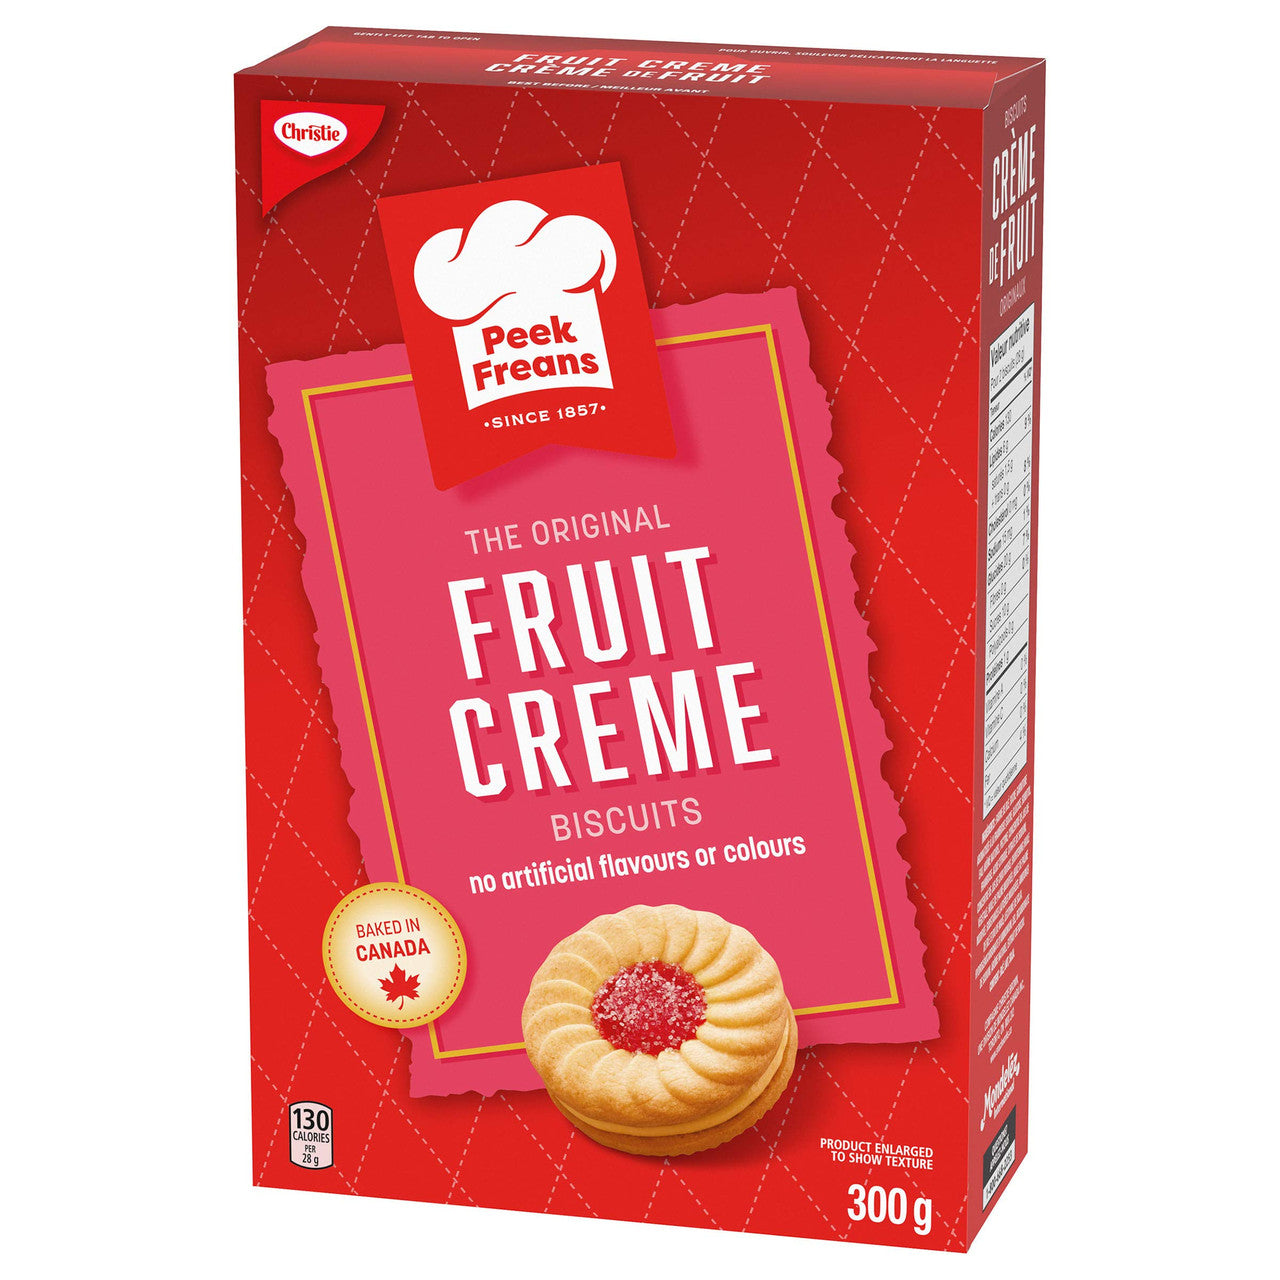 Peek Freans Fruit Creme Biscuits, 300g/10.6oz {Imported from Canada}